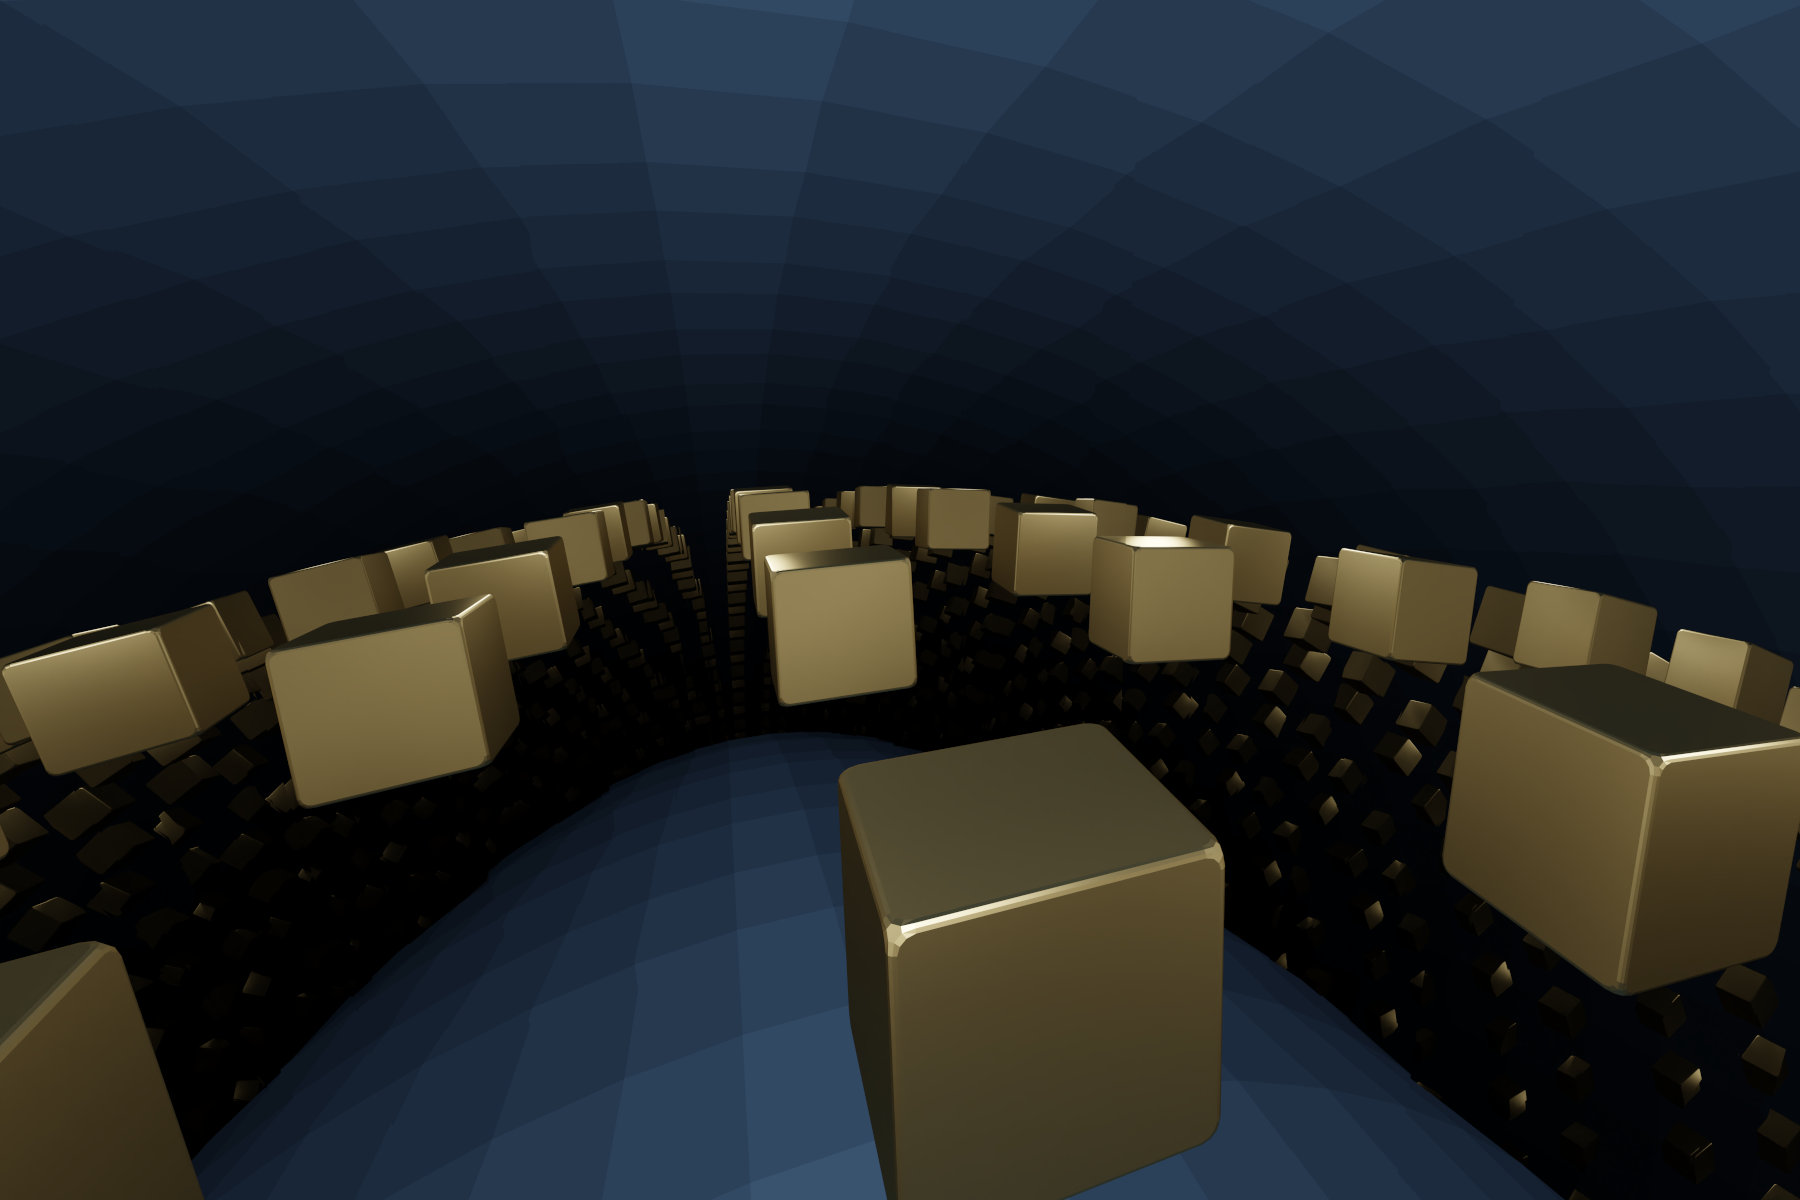 Virtual abstract scenery, Abstract digital art, Raytracing, Computer-rendered image, 2022. A golden cube appears in many reflected images on a curved blue surface.